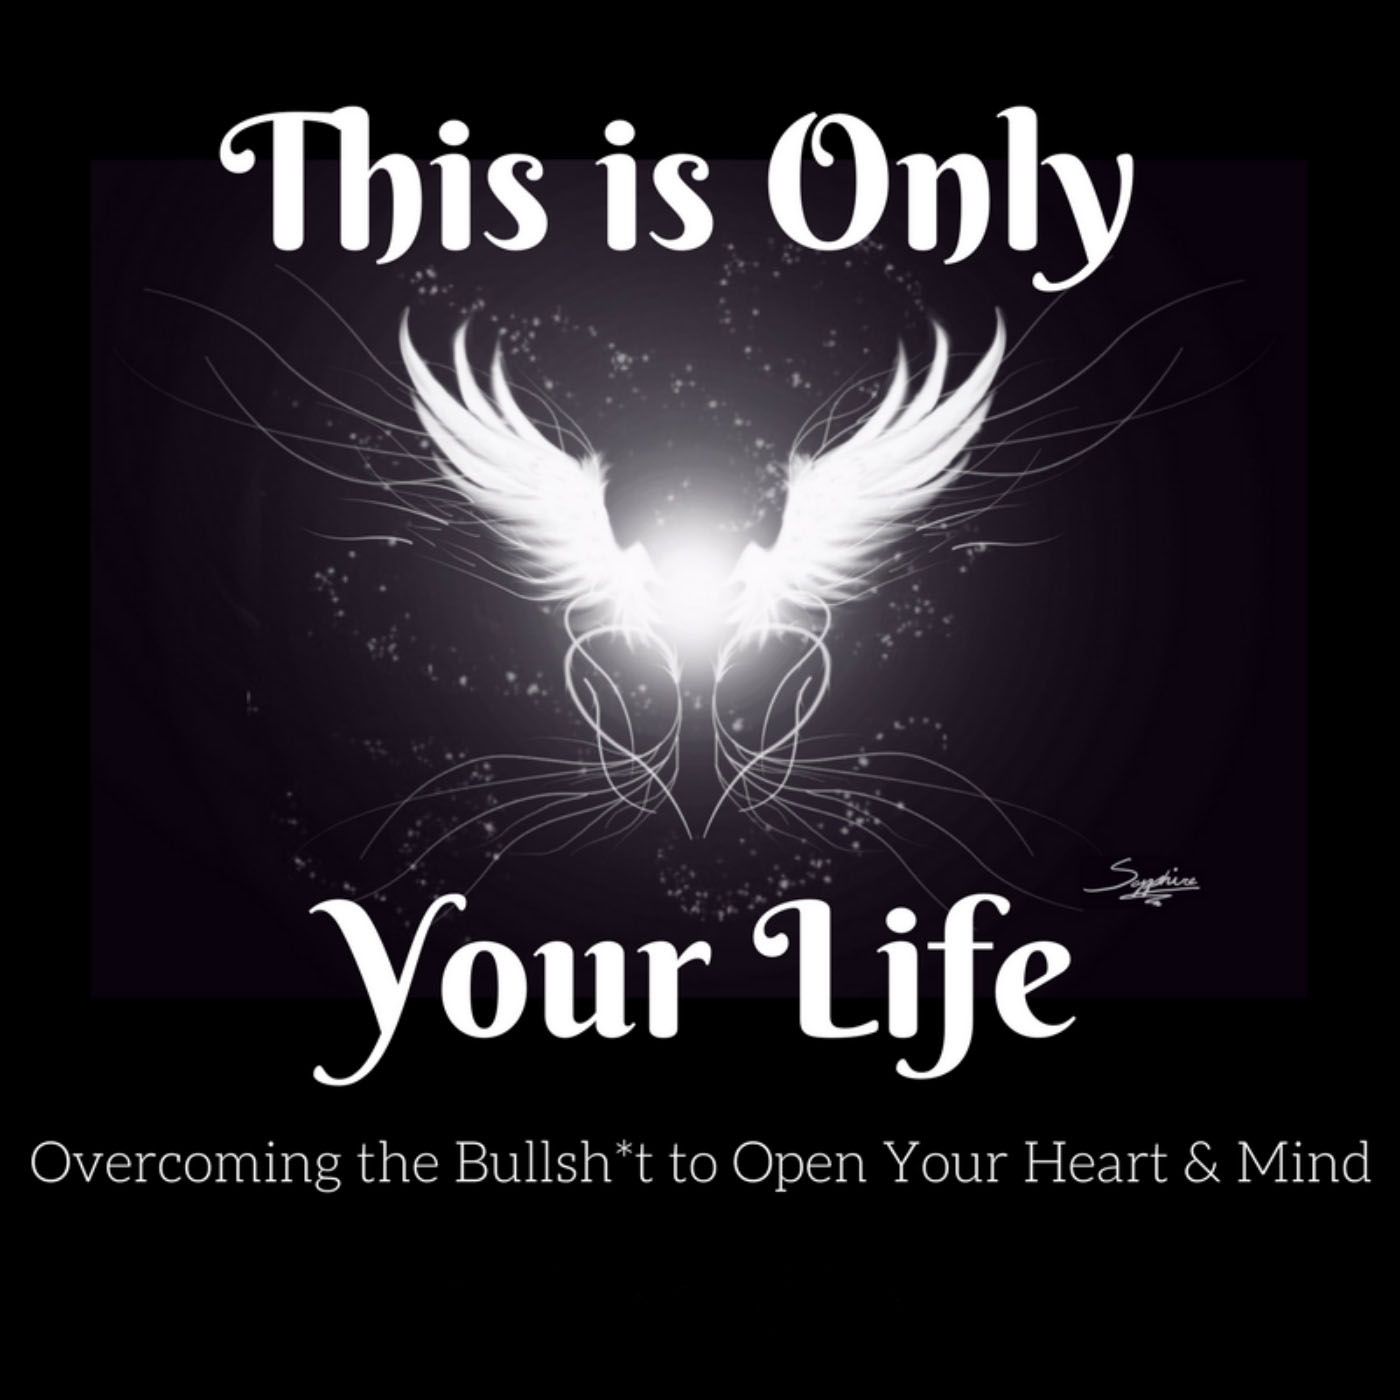 This is Only Your Life - Overcoming the Bullsh*t to Open Your Heart and Mind